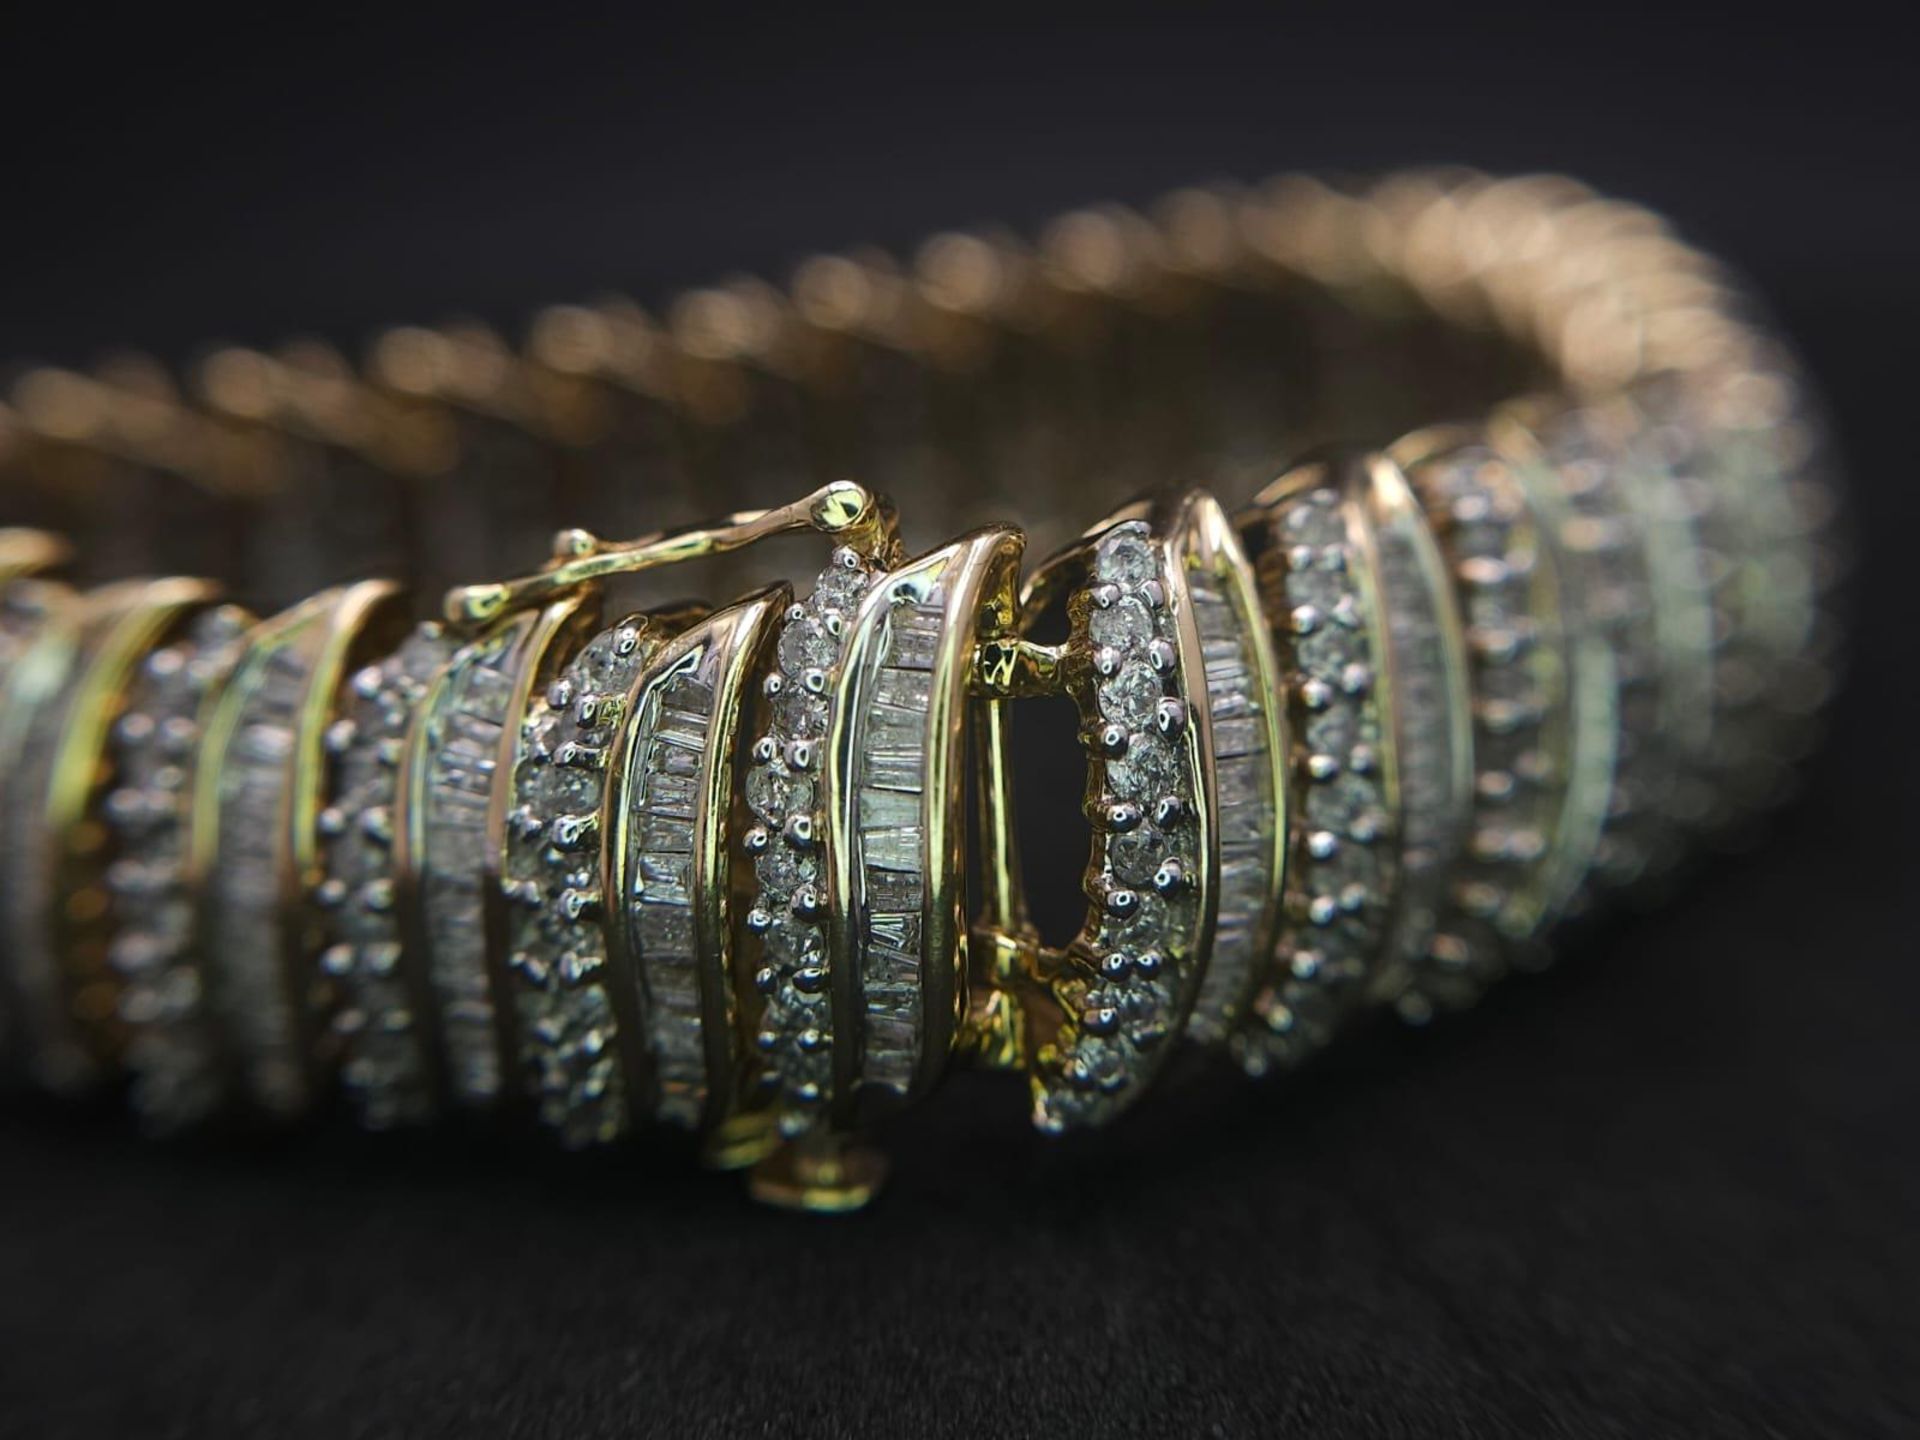 A BEAUTIFUL HEAD-TURNING 14K YELLOW GOLD DIAMOND TENNIS BRACELET WITH A MIXTURE OF ROUND AND - Image 6 of 10